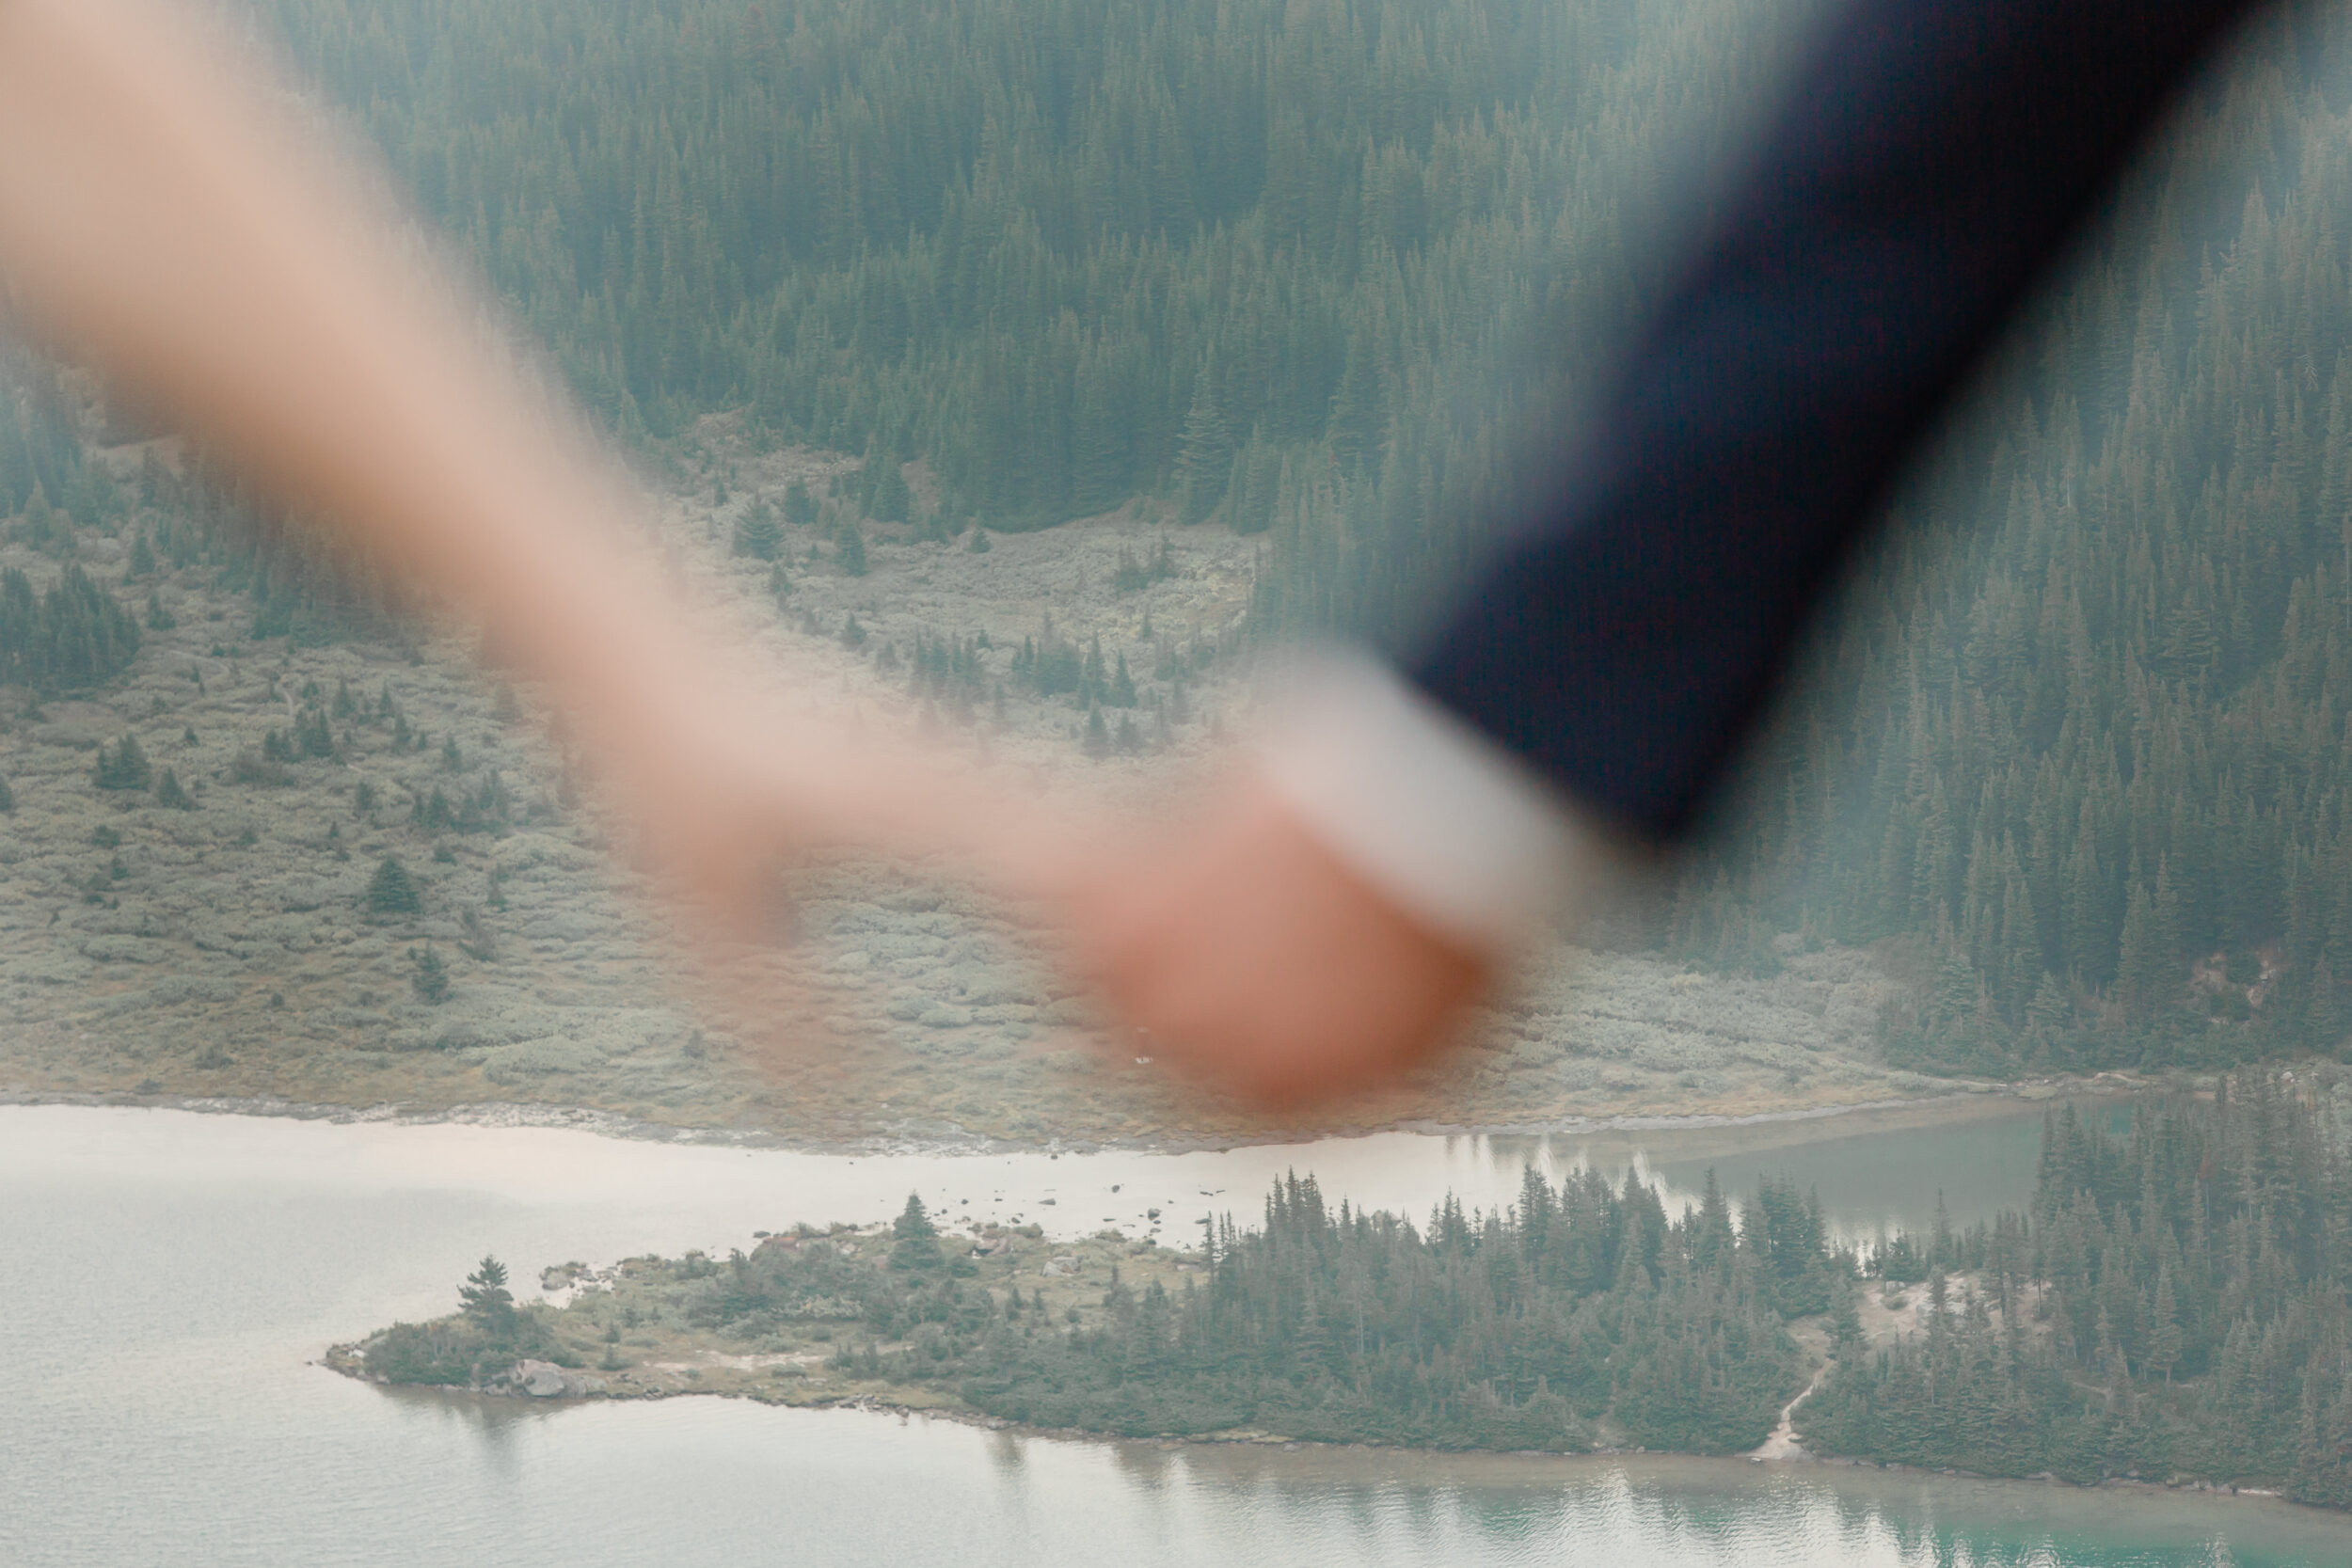 A couple holding hands with an alpine lake in the background.